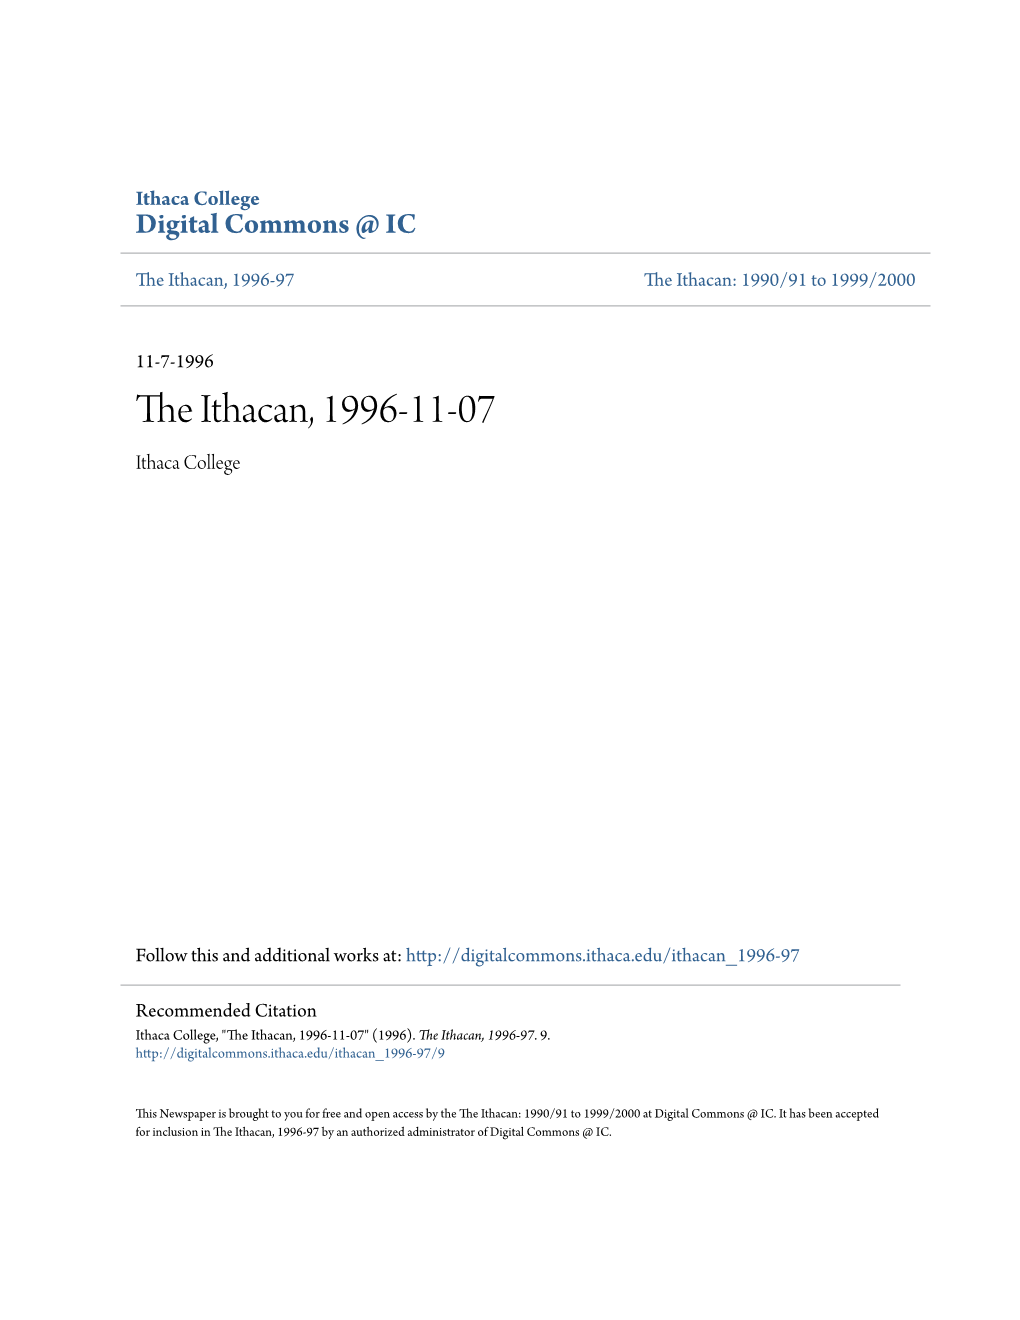 The Ithacan, 1996-11-07